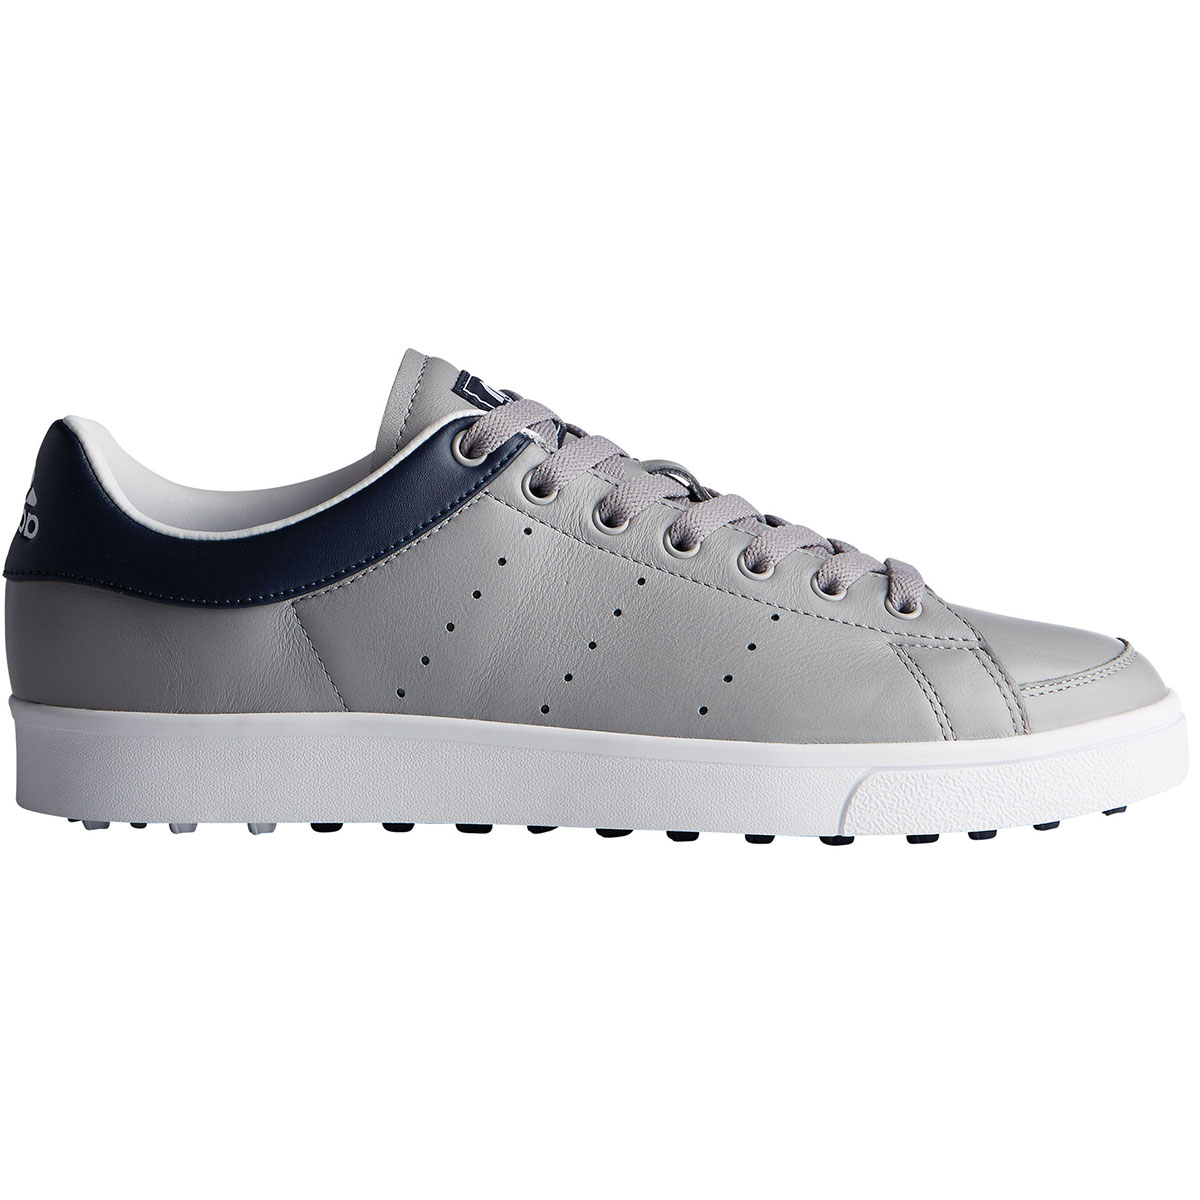 Antagonismo usted está Mono adidas Men's adicross Classic Leather Spikeless Golf Shoes from american  golf